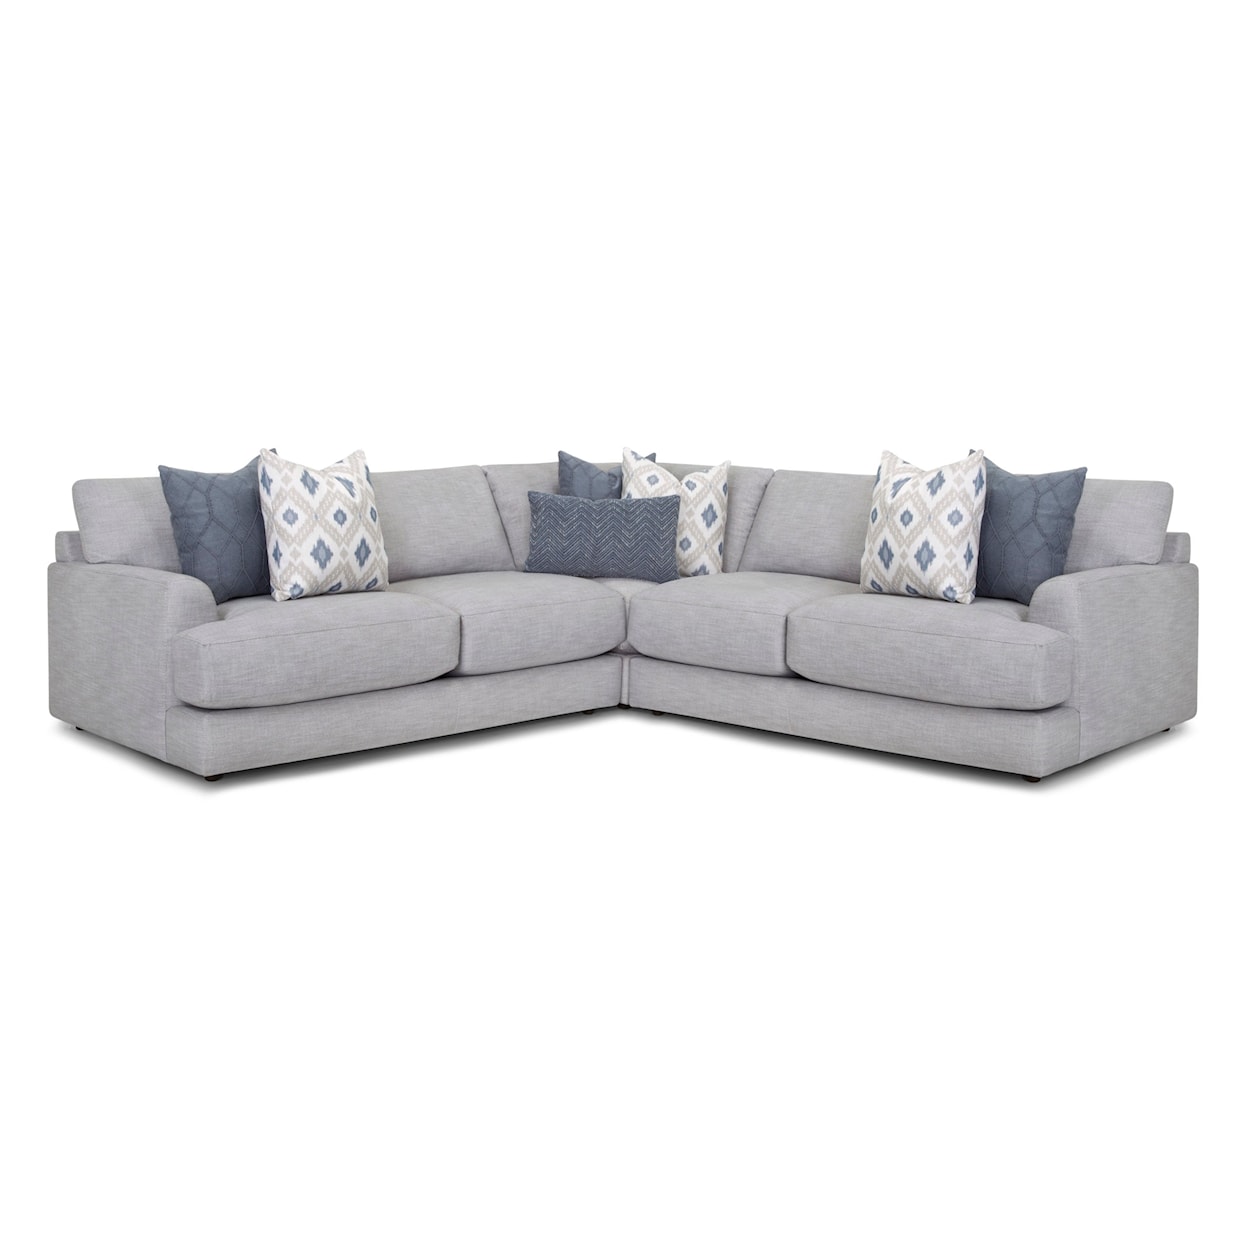 Franklin 900 Indy 3-Piece Sectional Sofa